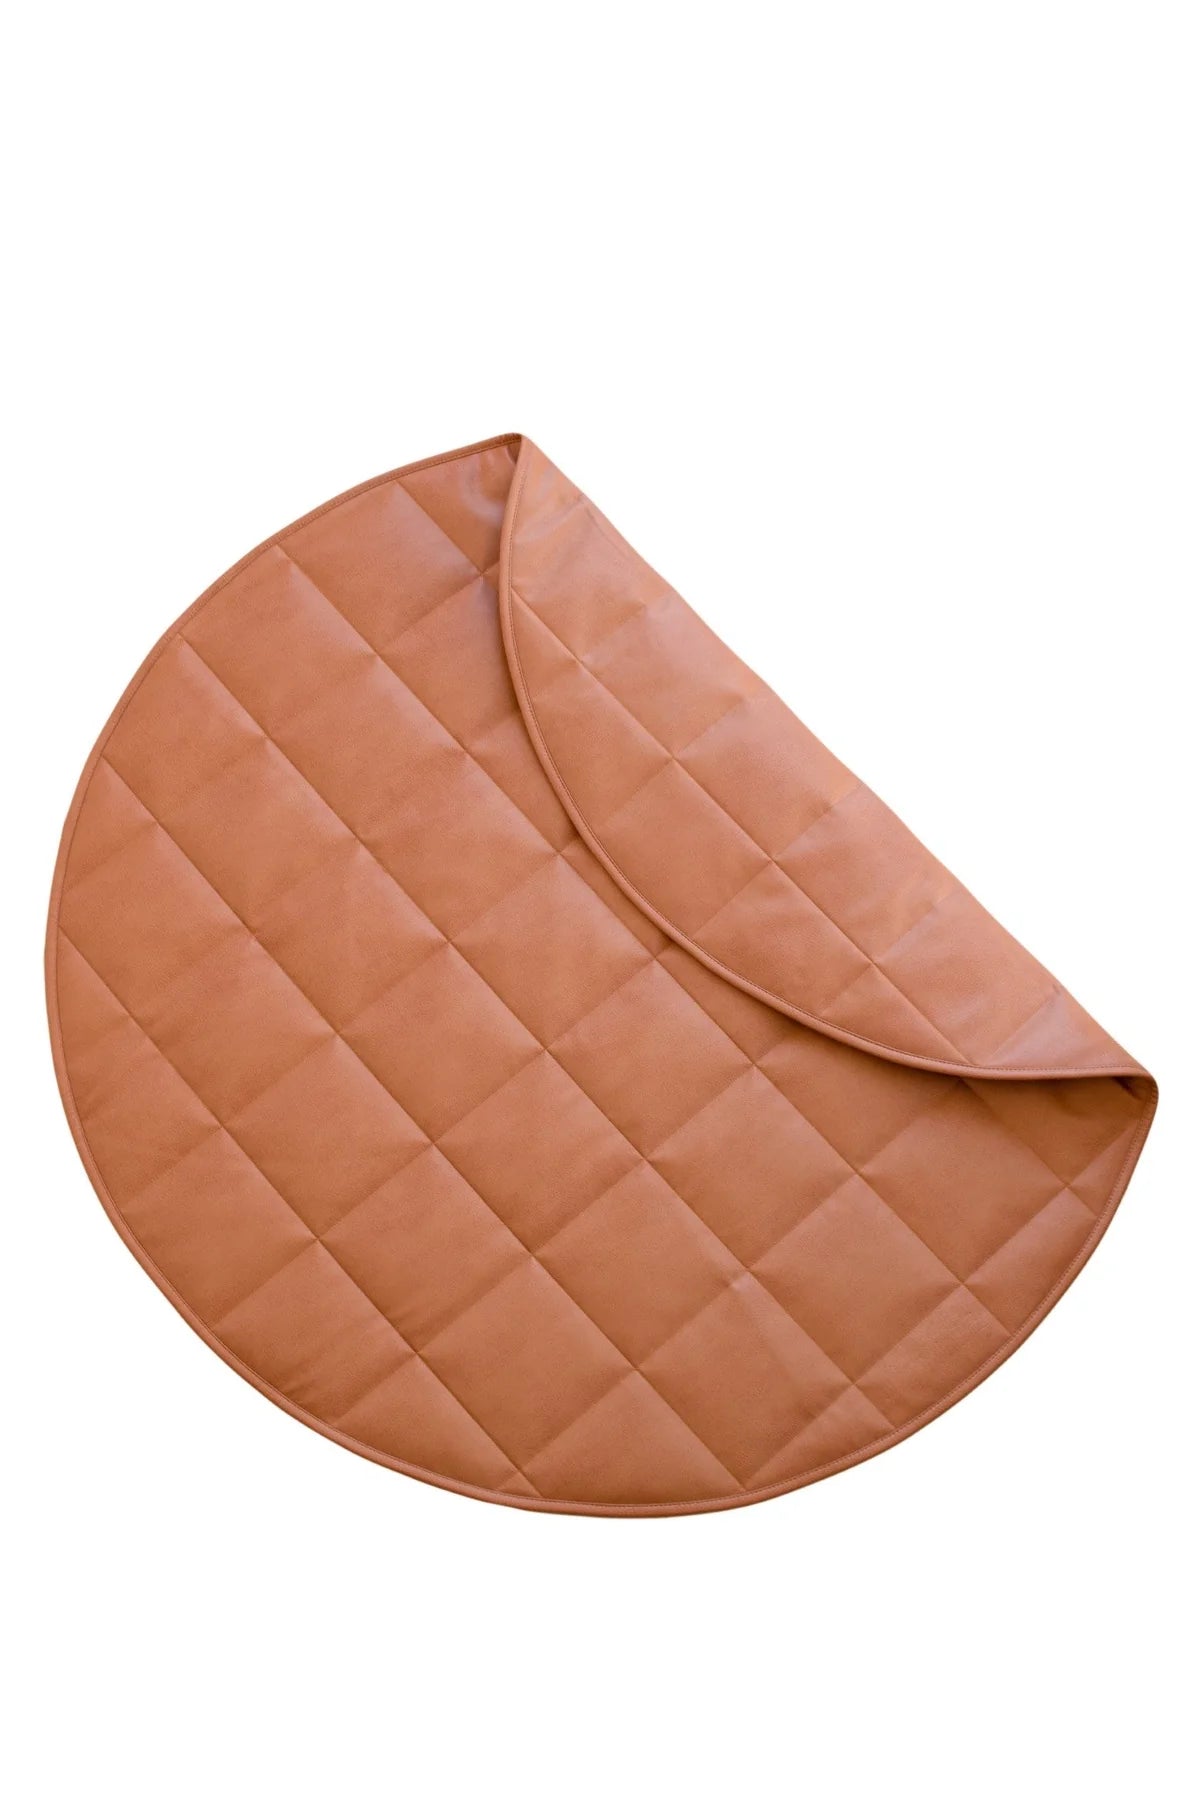 HENLEE QUILTED PLAY MAT: TERRA